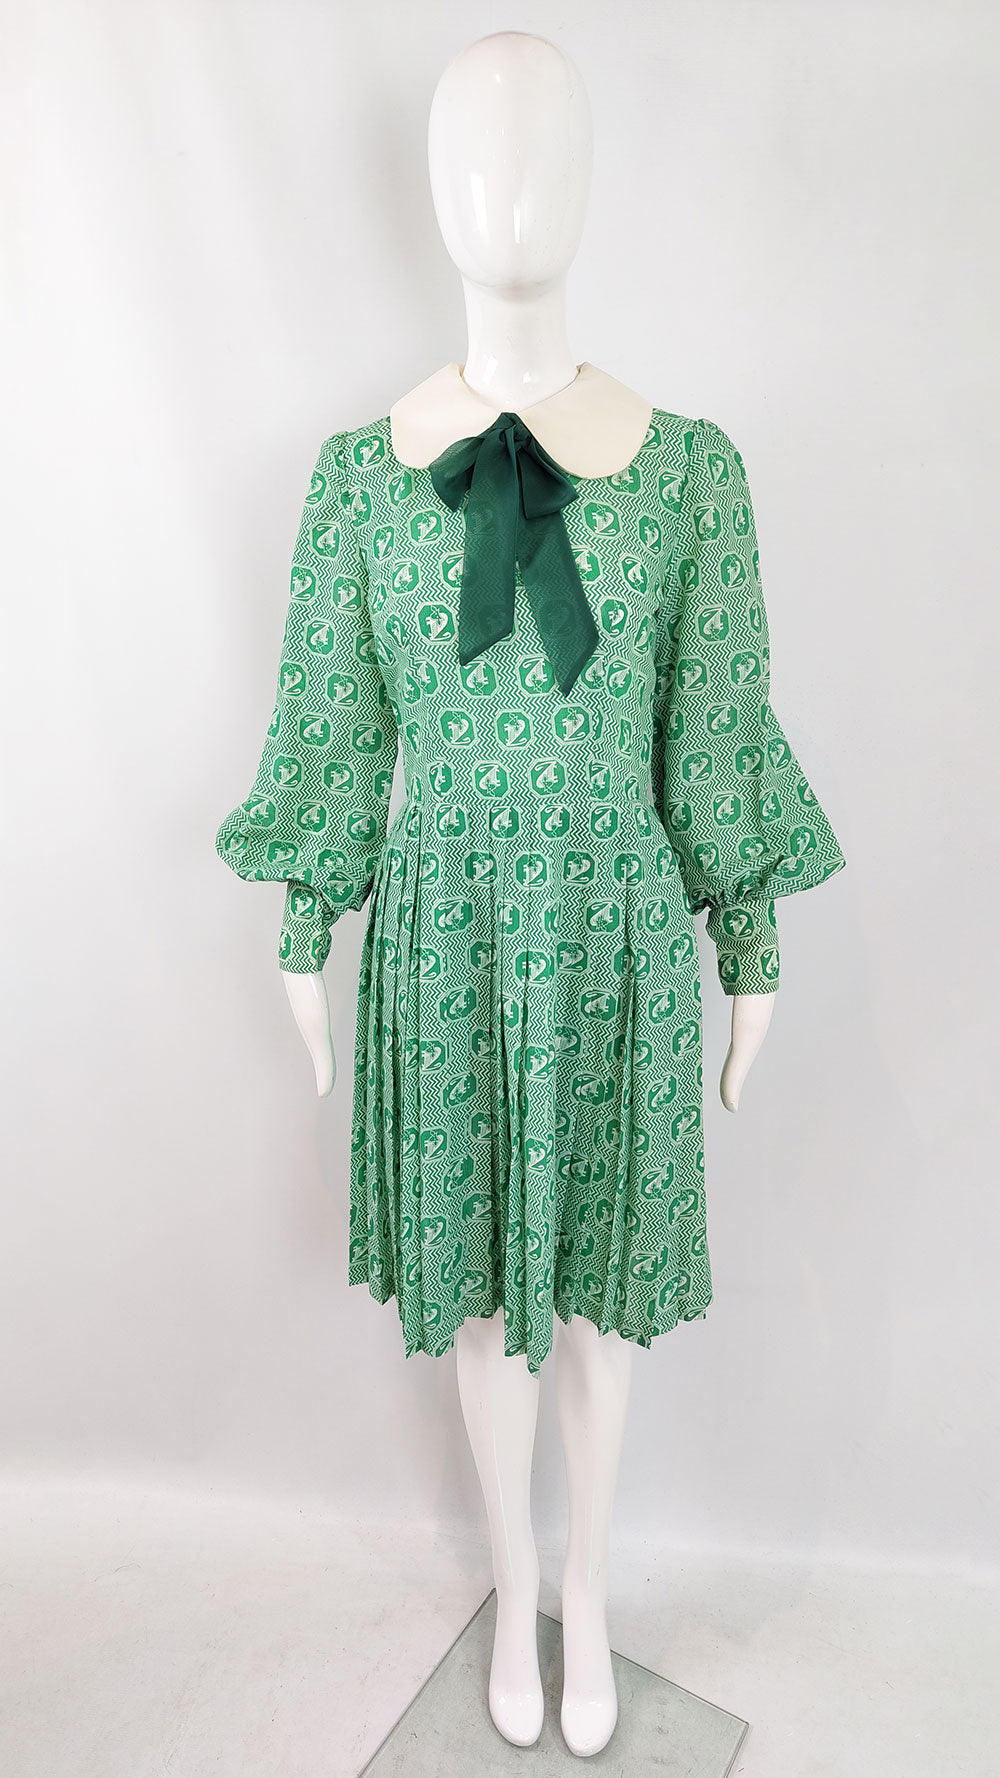 A vintage dress by Jean Allen from the early 60s with a satin pussybow beneath a peter pan collar.